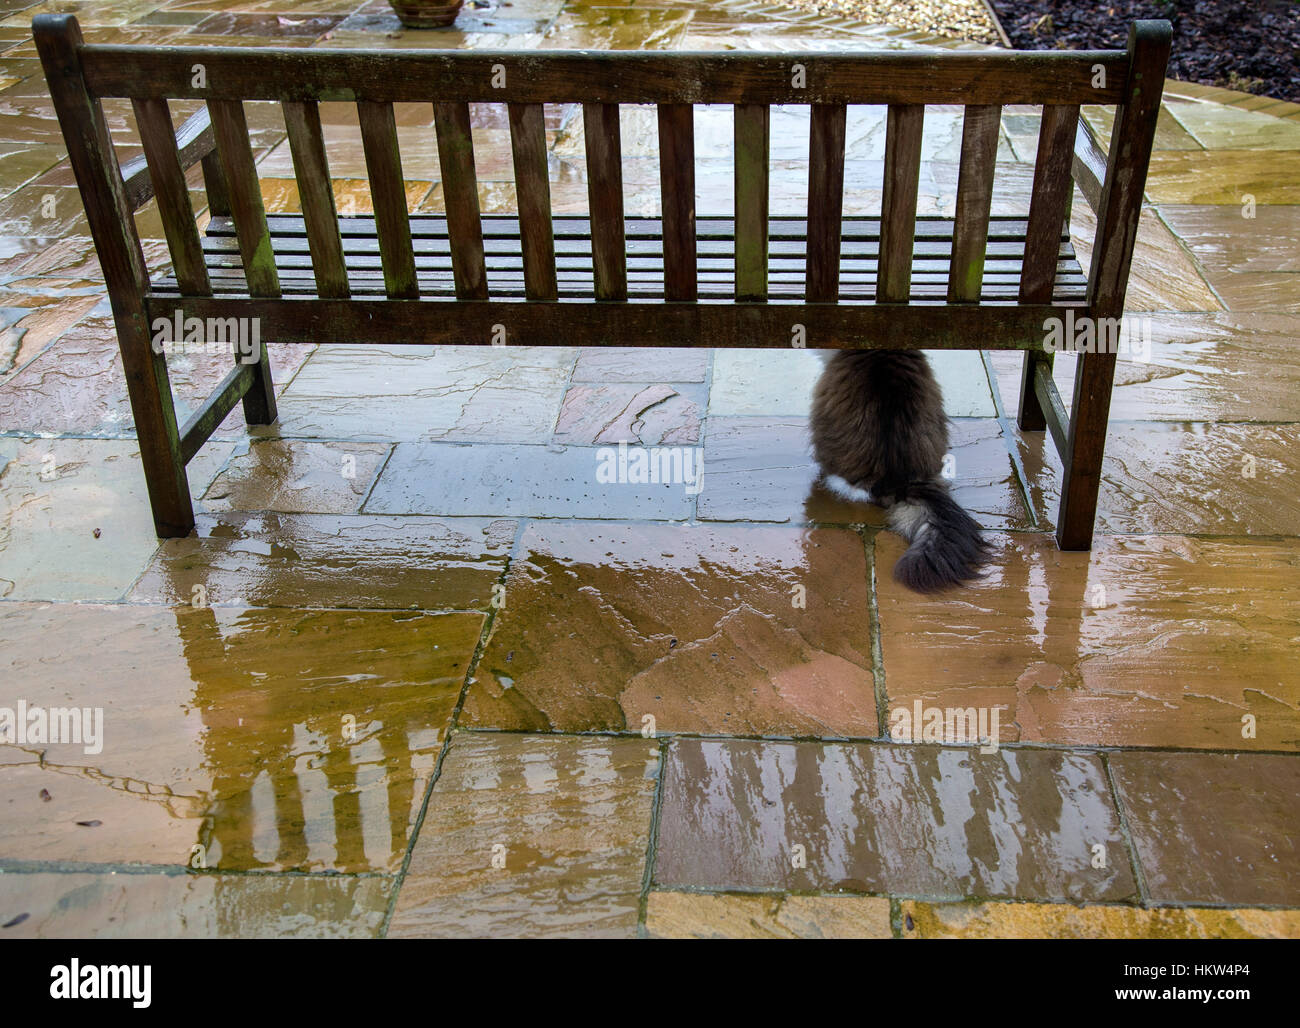 Sidmouth, Devon. 30th Jan 2017. Rain, rain, go away. A cat shelters from the pouring rain under a garden bench in Sidmouth, Devon. The Met Office says more rain is expected in the next few days. Photo Tony Charnock/Alamy Live News Stock Photo